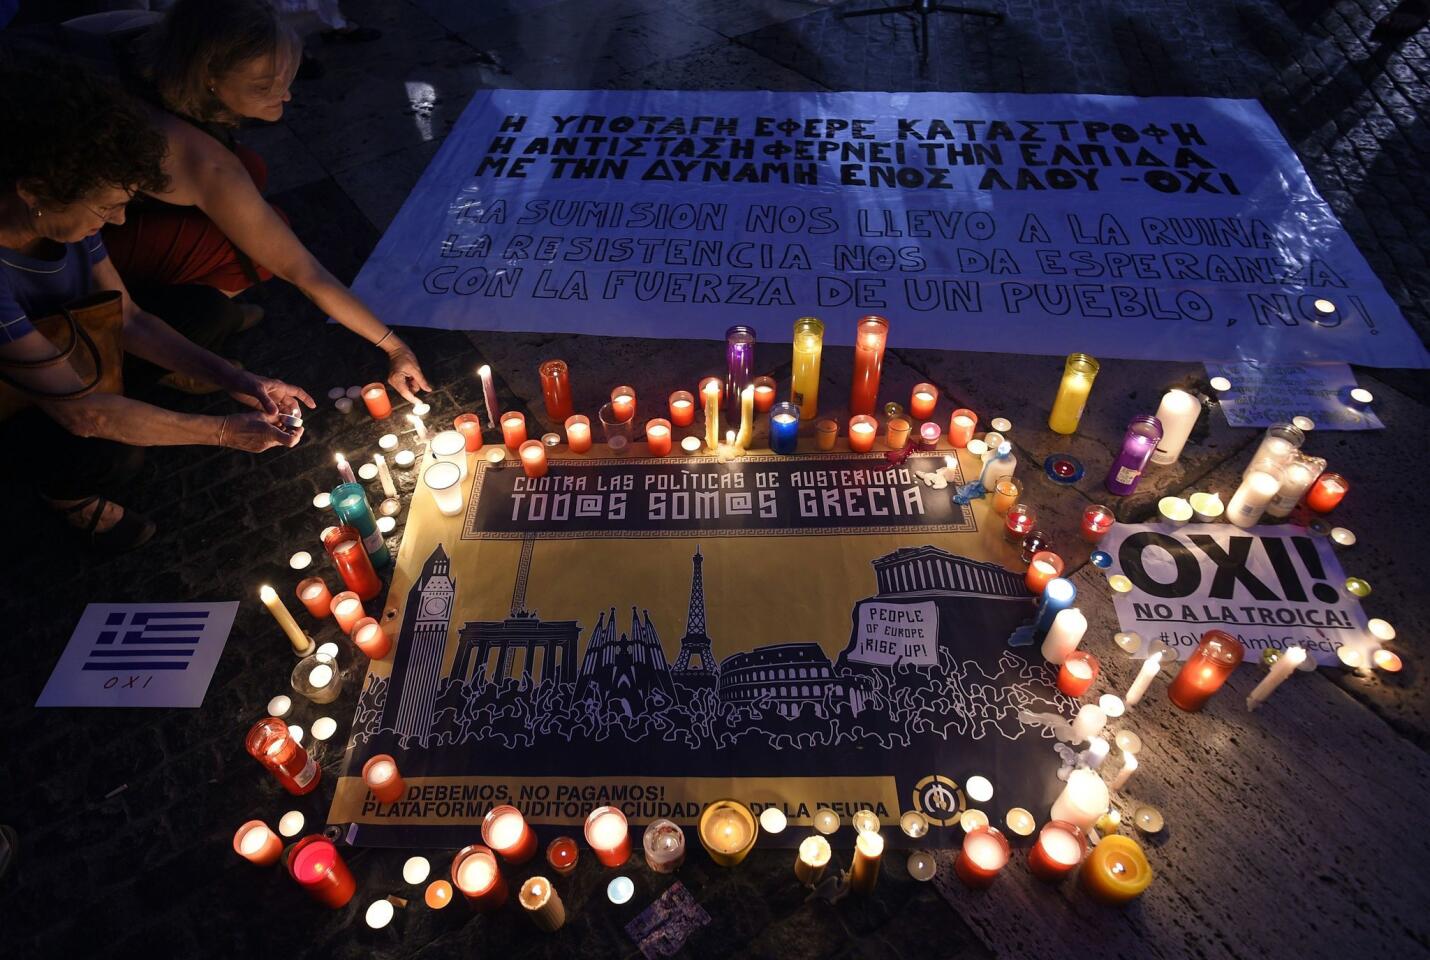 People light candles displayed next to a message as they take part in a demonstration in support of Greece, at Sant Jaume square in Barcelona on July 4, 2015 a day before nearly 10 million Greek voters take to the ballot booths to vote 'Yes' or 'No' in a referendum asking if they accept more austerity measures in return for bailout funds.